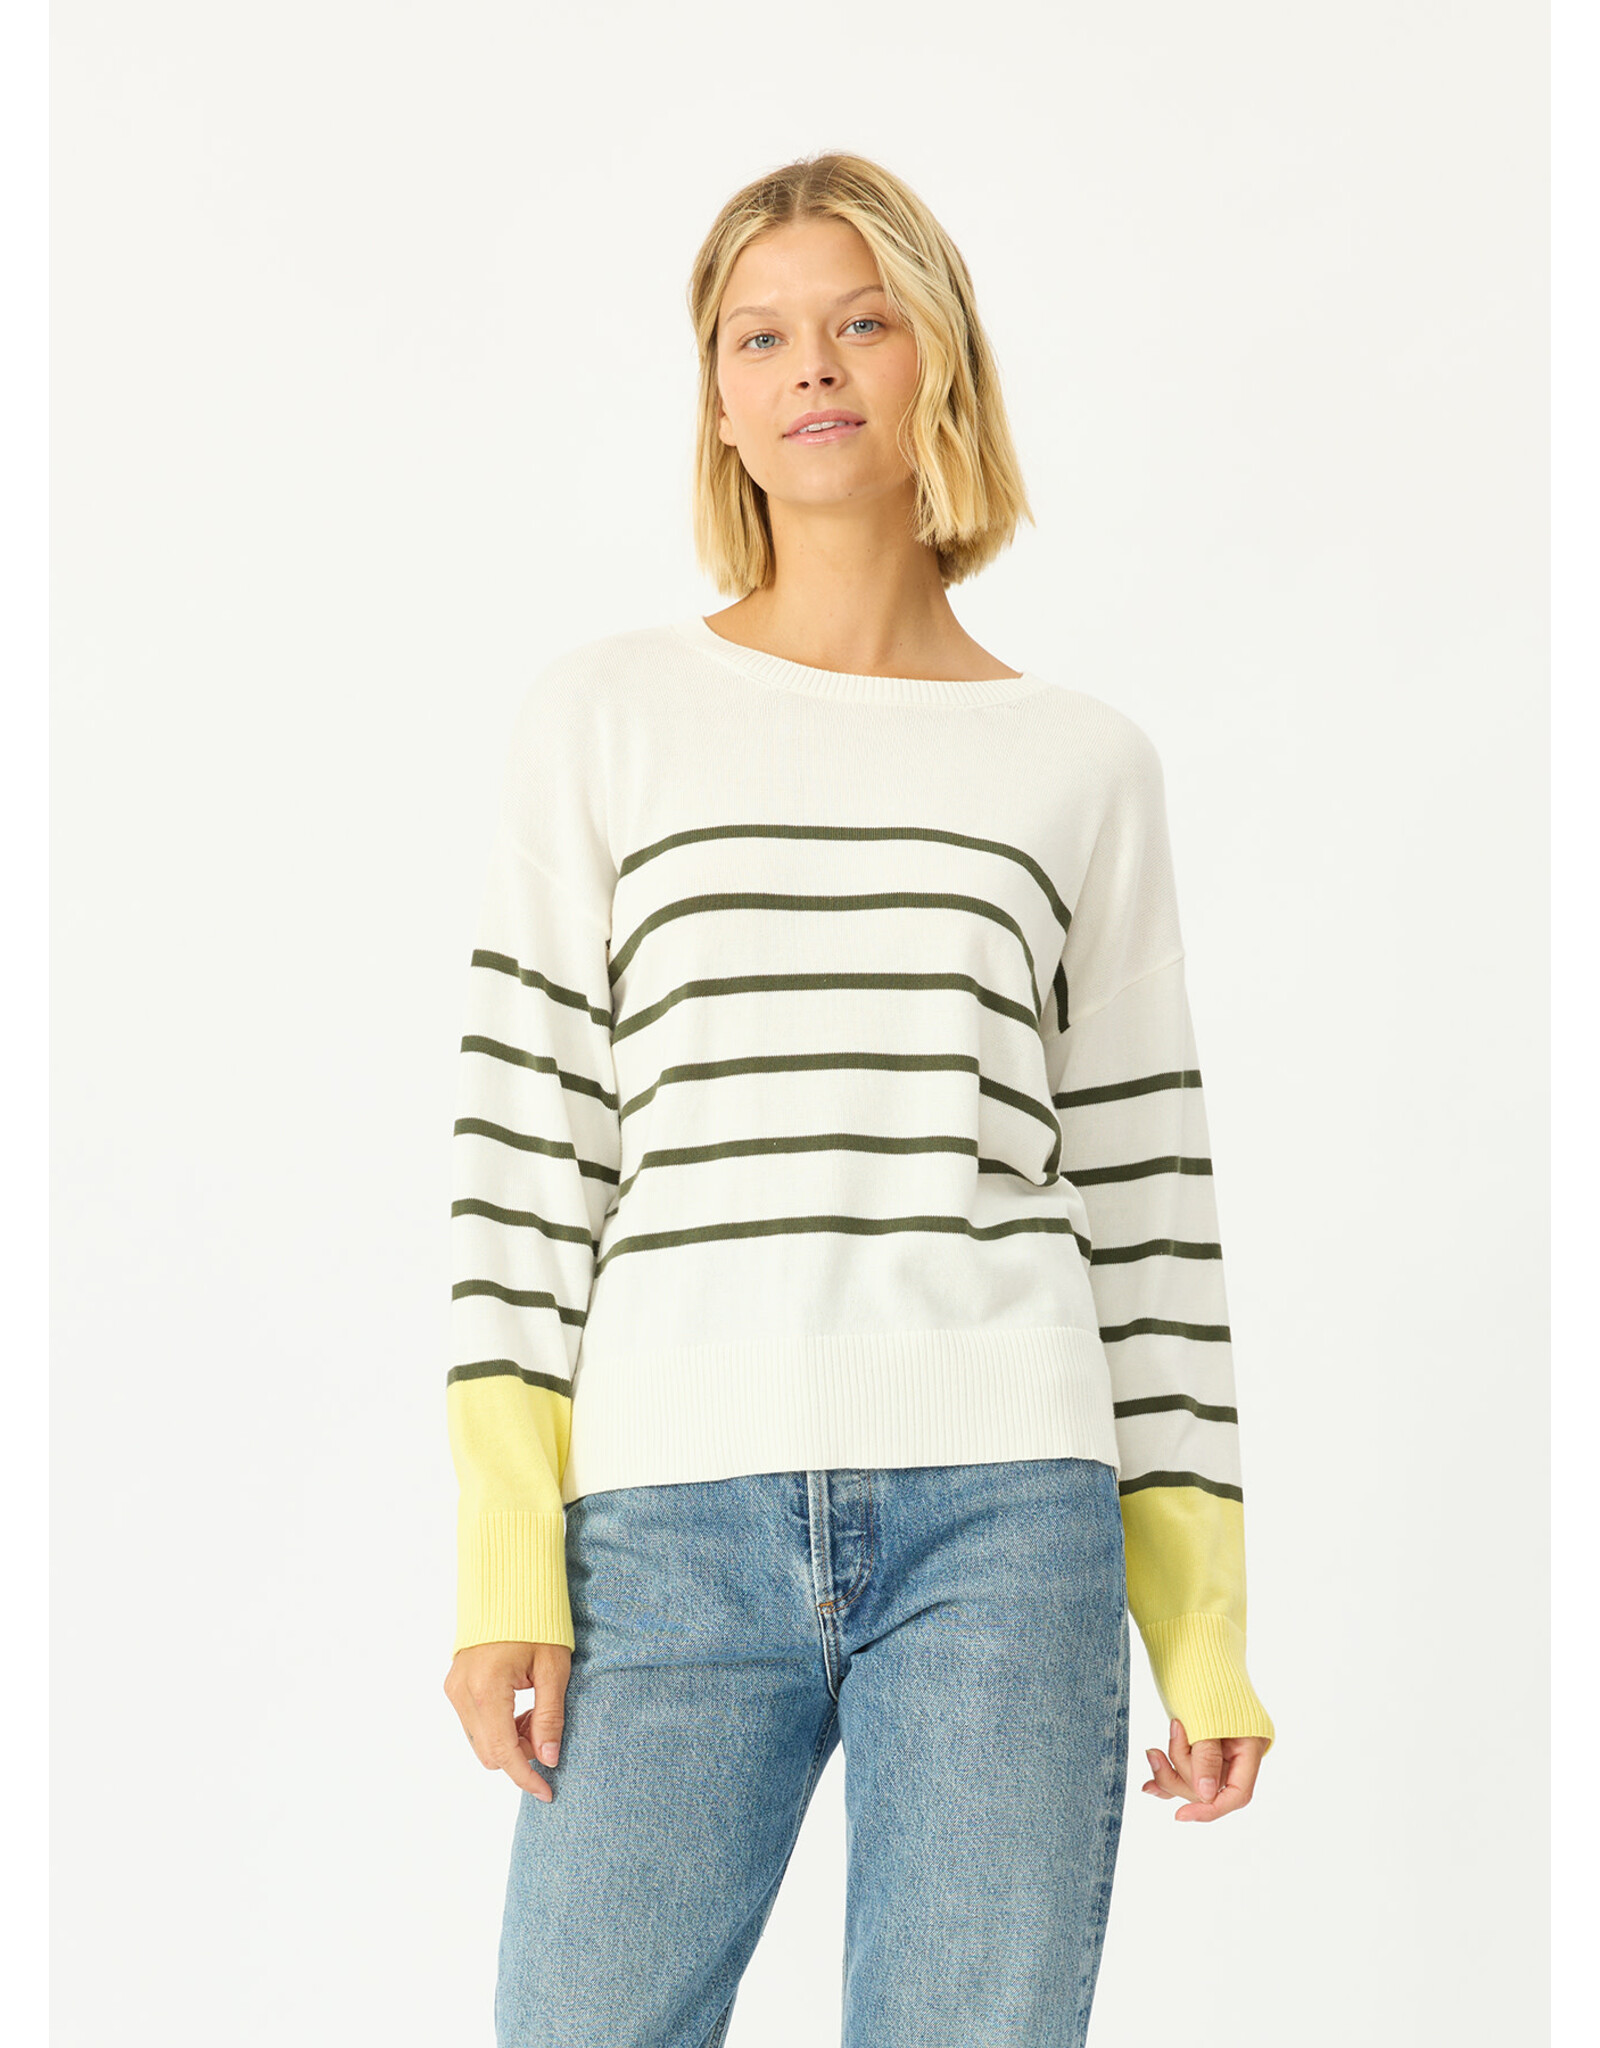 Stitches & Stripes SS Belsley Pullover